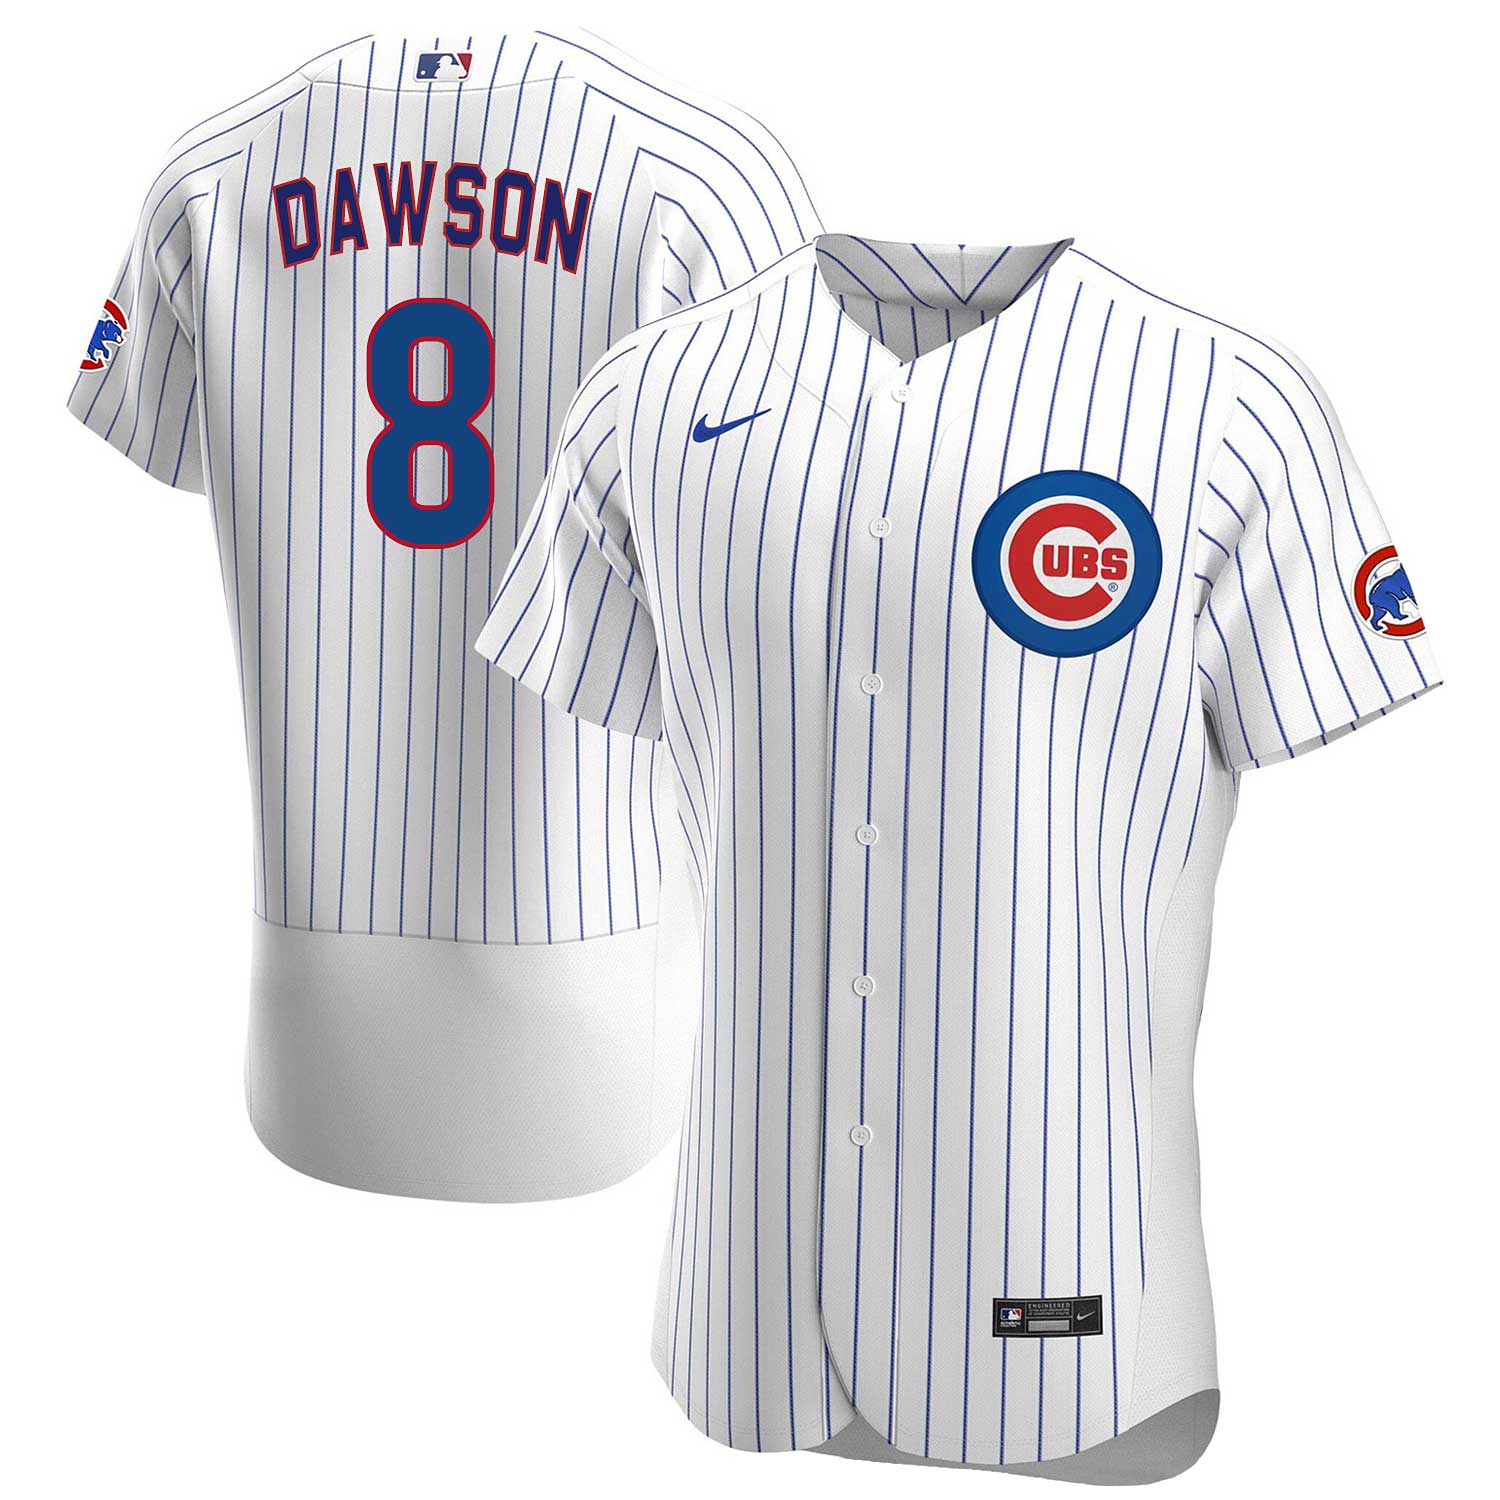 Images of Andre Dawson